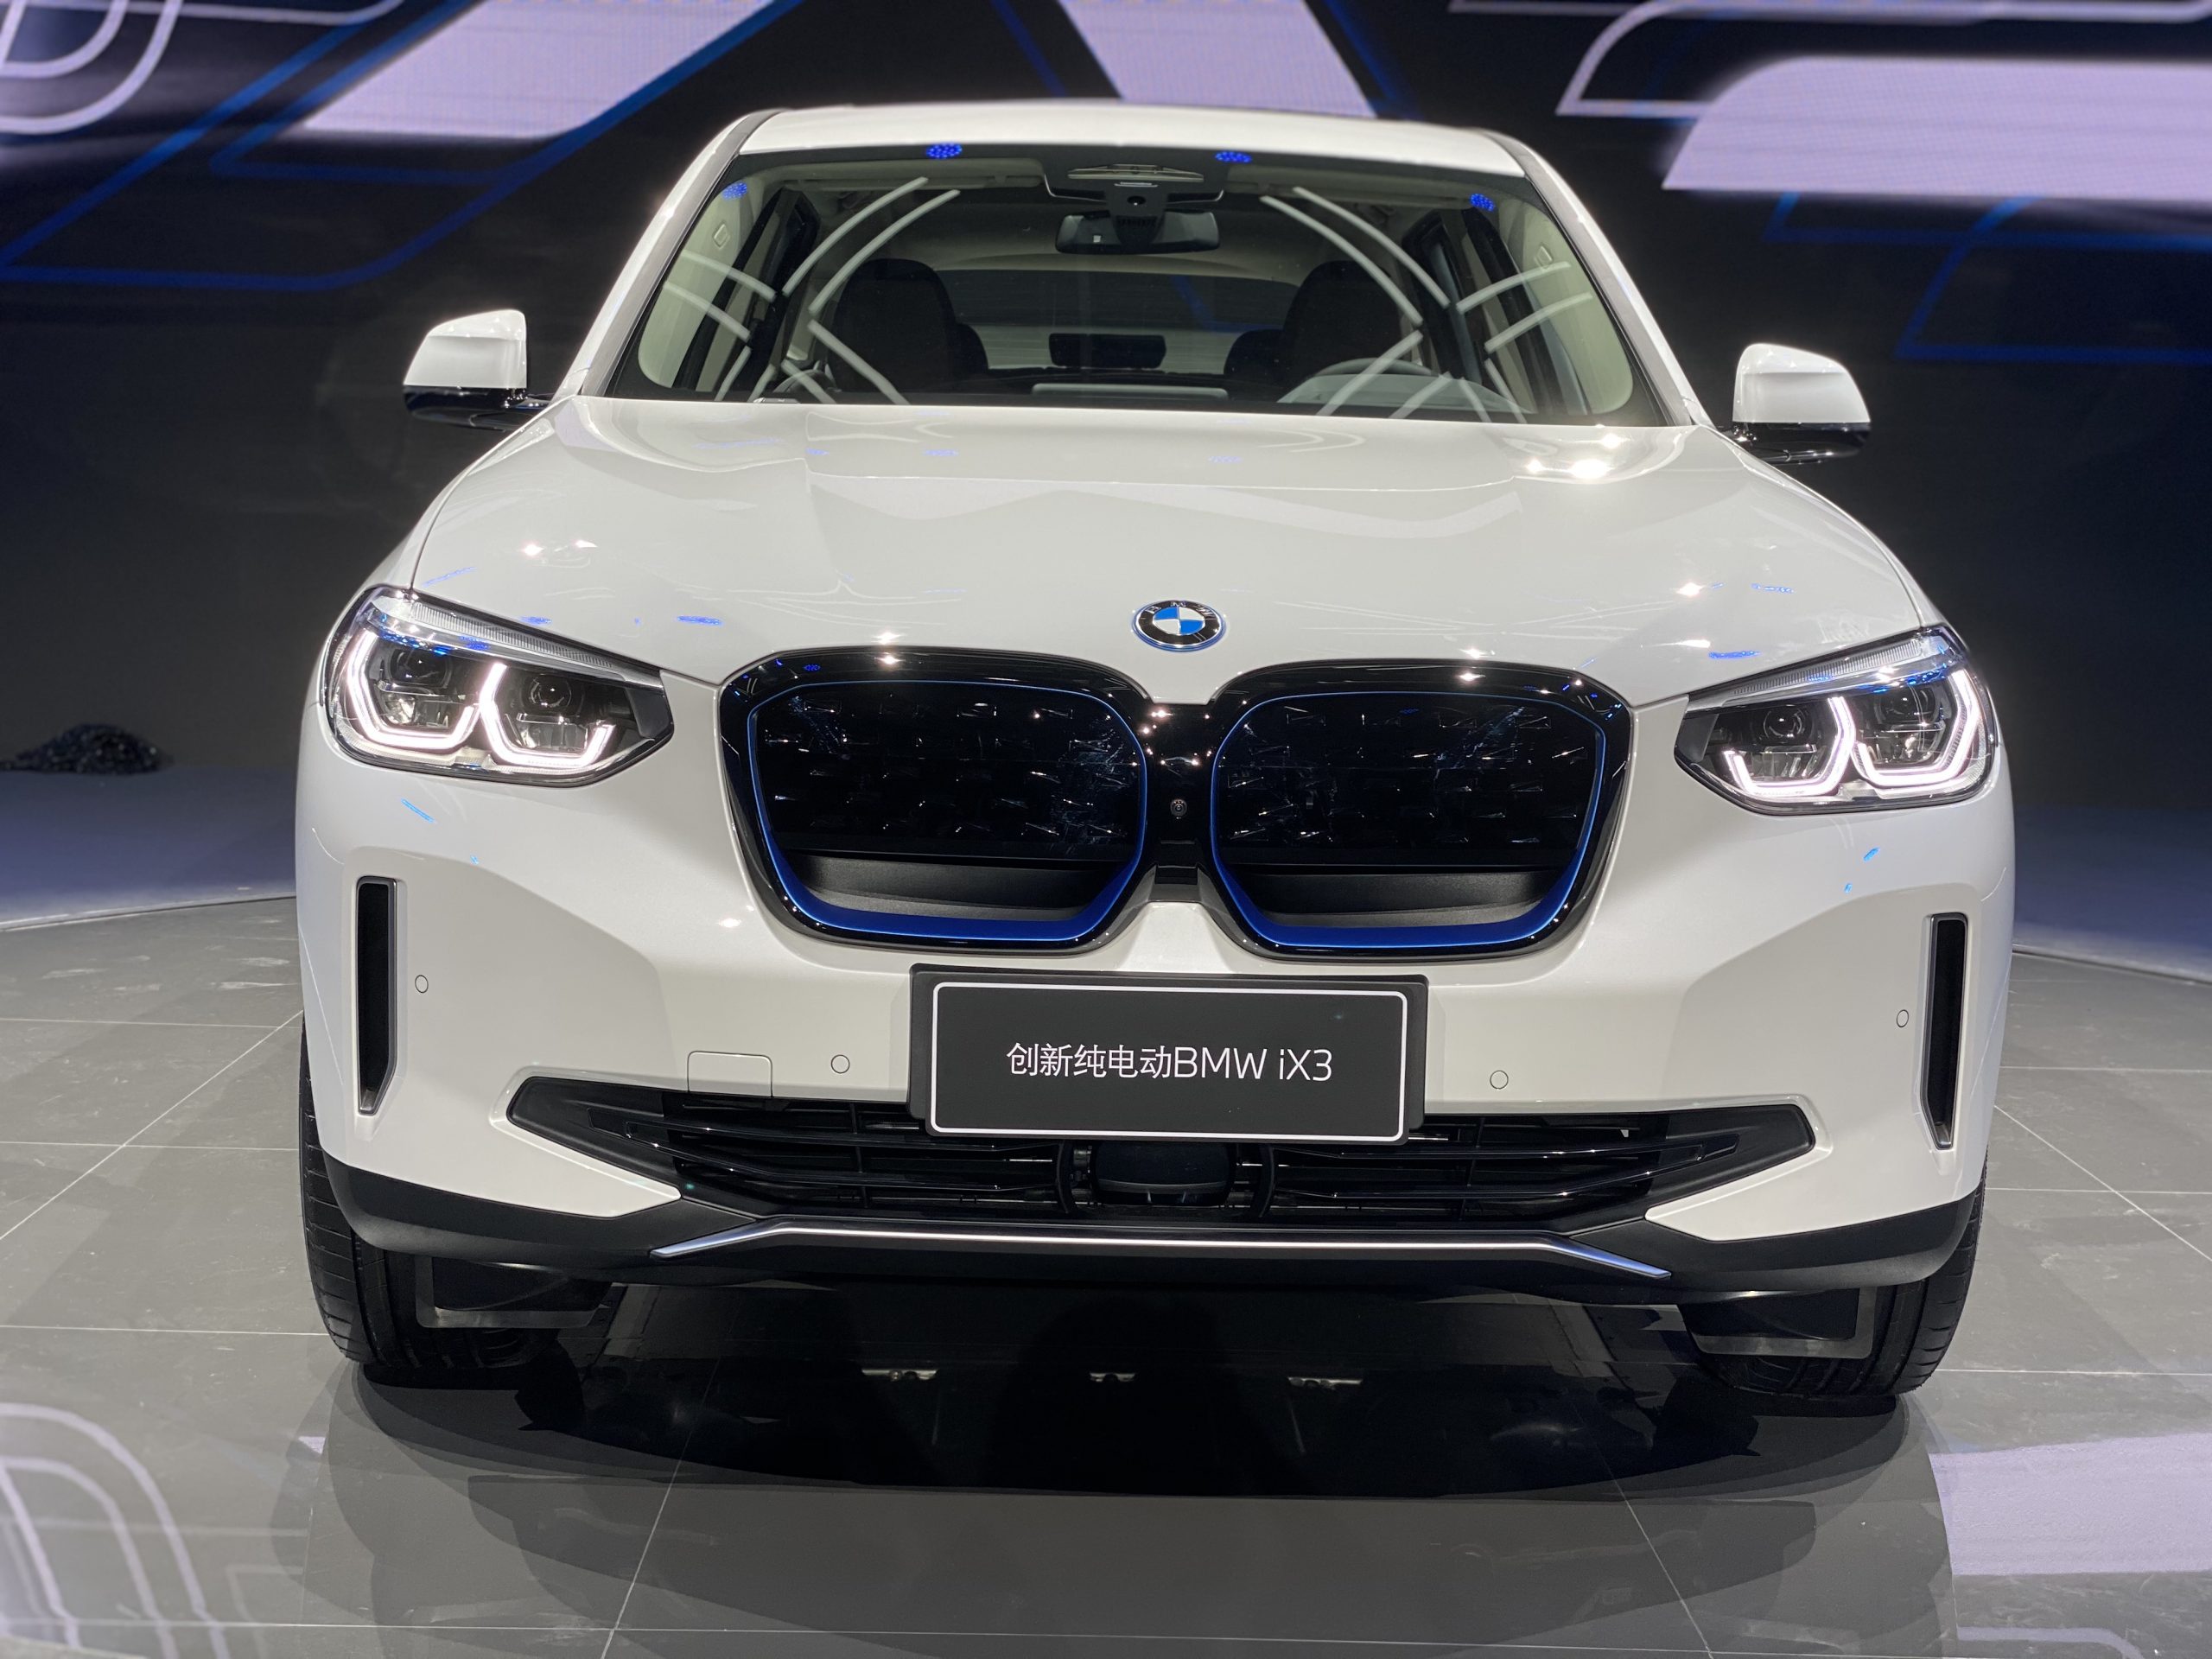 The BMW iX3, a pure electric SUV, made its global debut. The leading model is priced at 470,000 yuan, and the flagship model at 510,000 yuan.